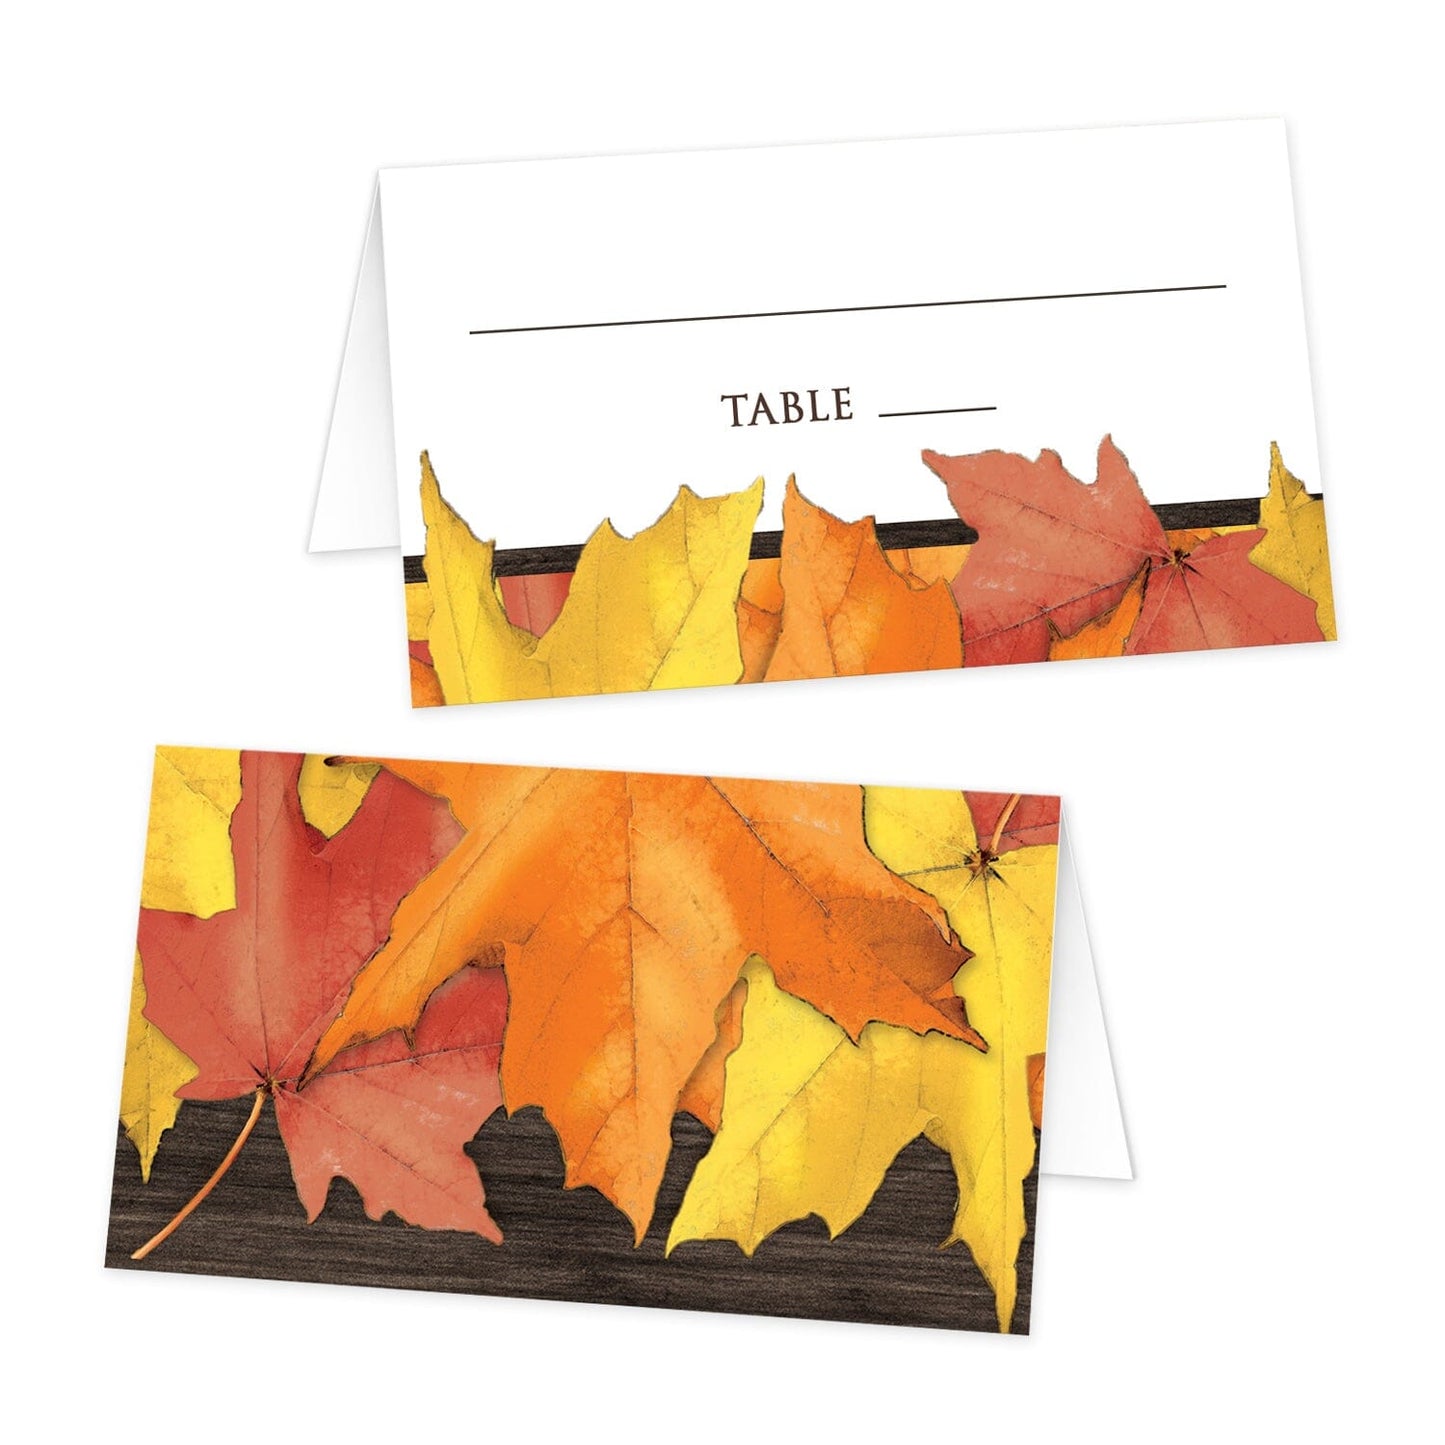 Rustic Autumn Leaves Wood Folded Place Cards at Artistically Invited. Southern-inspired rustic autumn leaves wood folded place cards with an arrangement of rustic yellow, orange, and red fall leaves along the top over a dark brown wood pattern on one side of the cards. Your lines for writing the guest's name and table number are on the other side of the fold of these cards in a white space above an arrangement of rustic leaves that runs along the bottom.